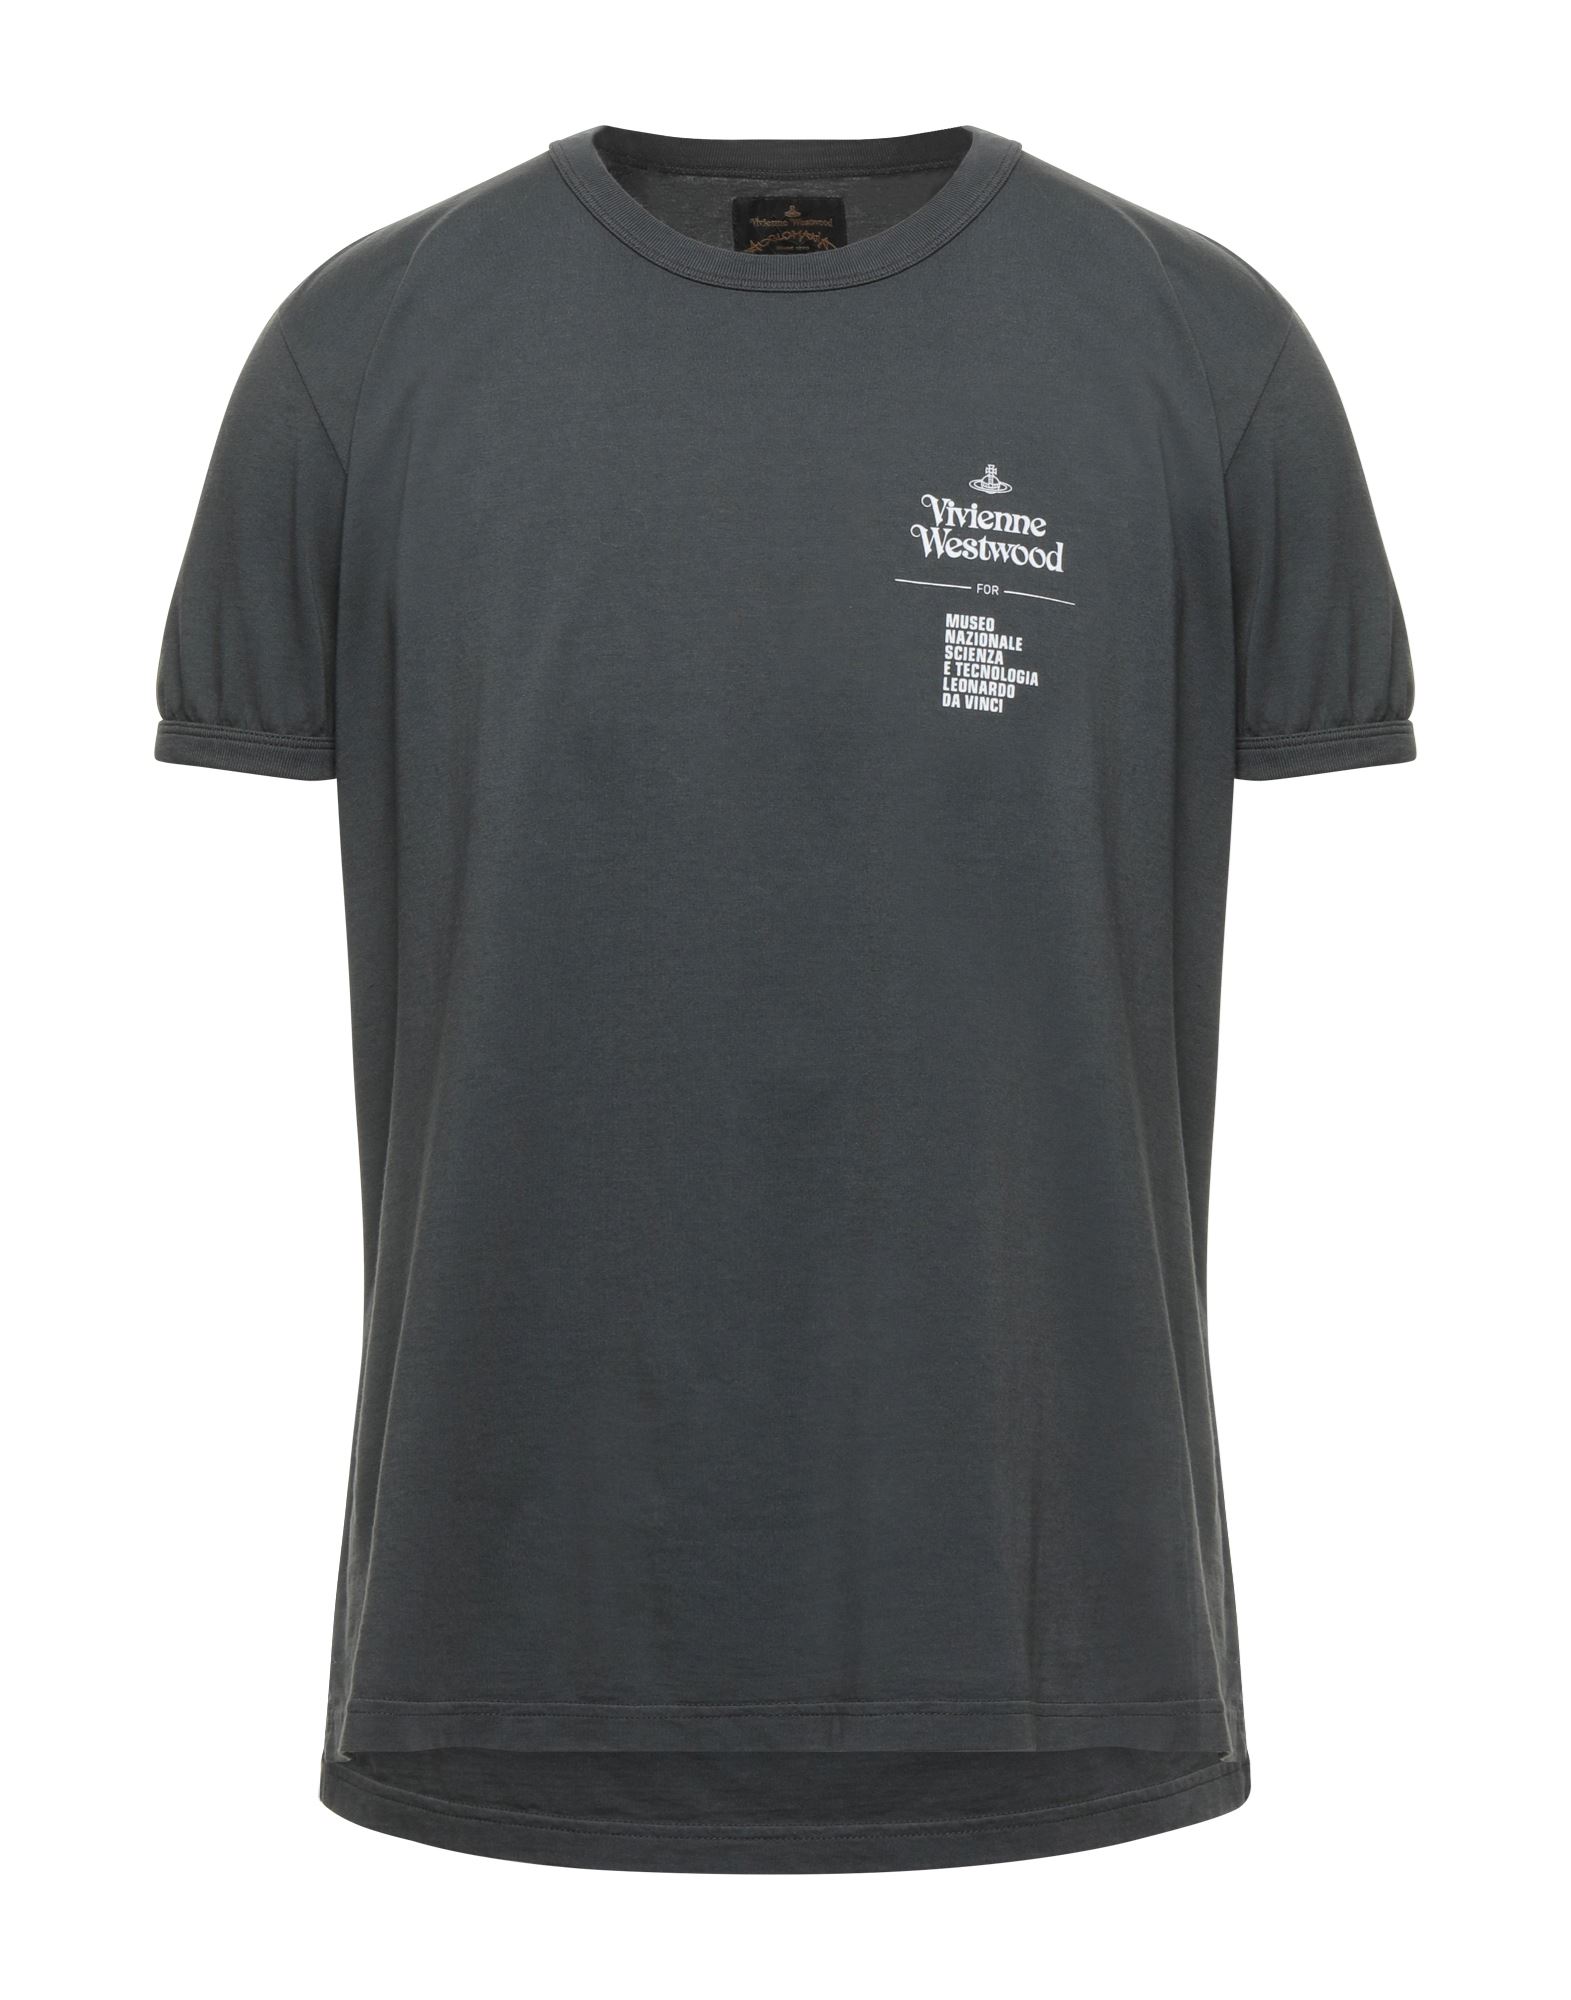 Vivienne Westwood Anglomania T-shirts In Steel Grey